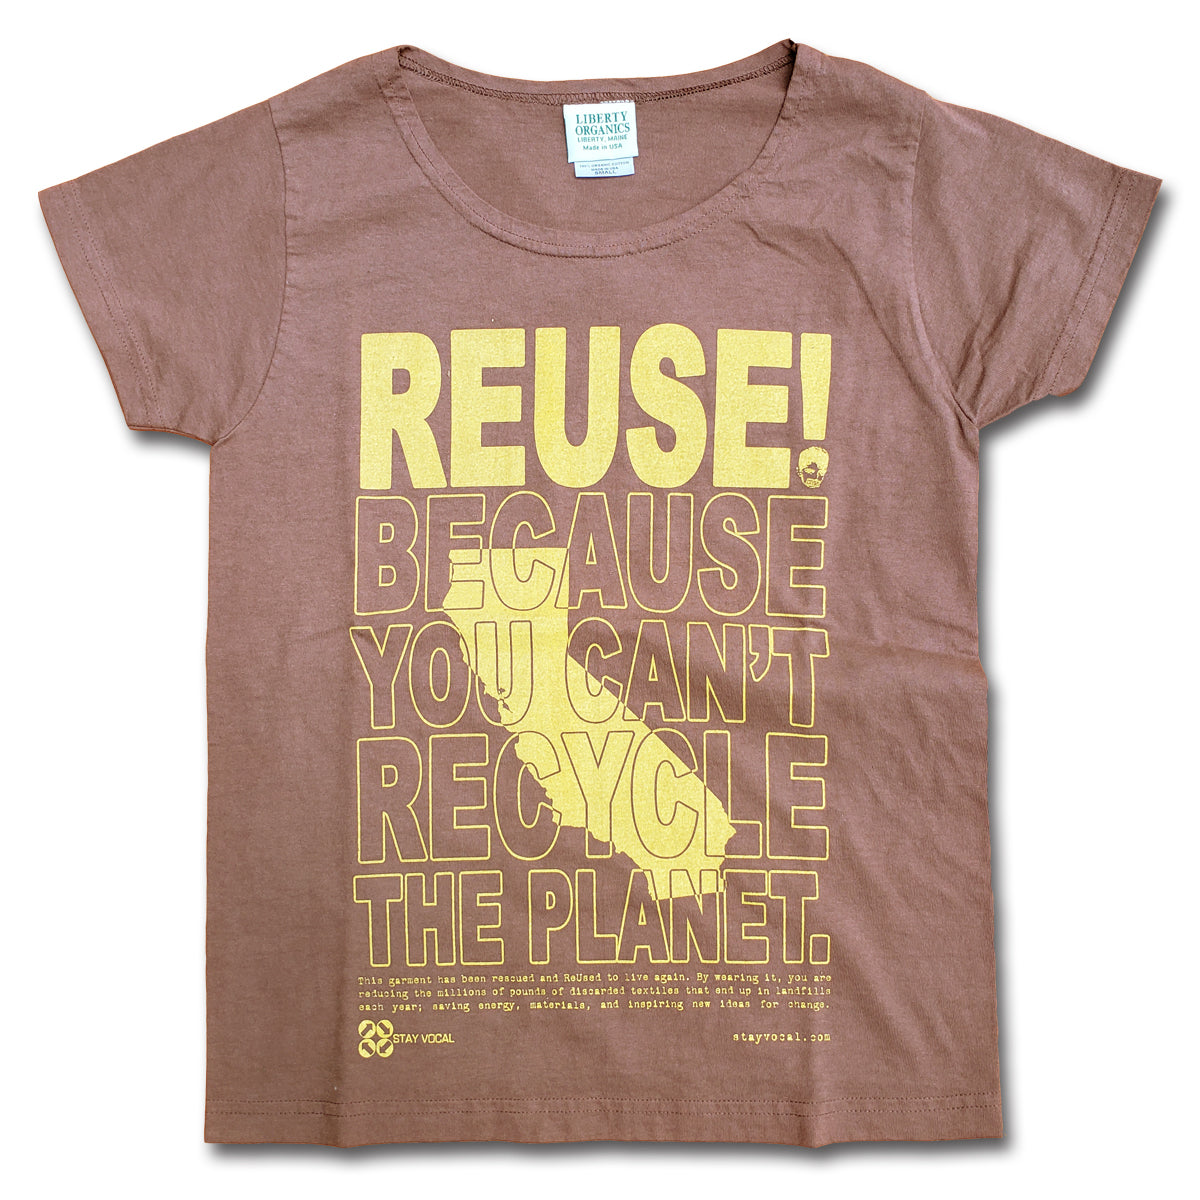 REUSE! Because You Can't Recycle The Planet. California Scoop Neck Tee